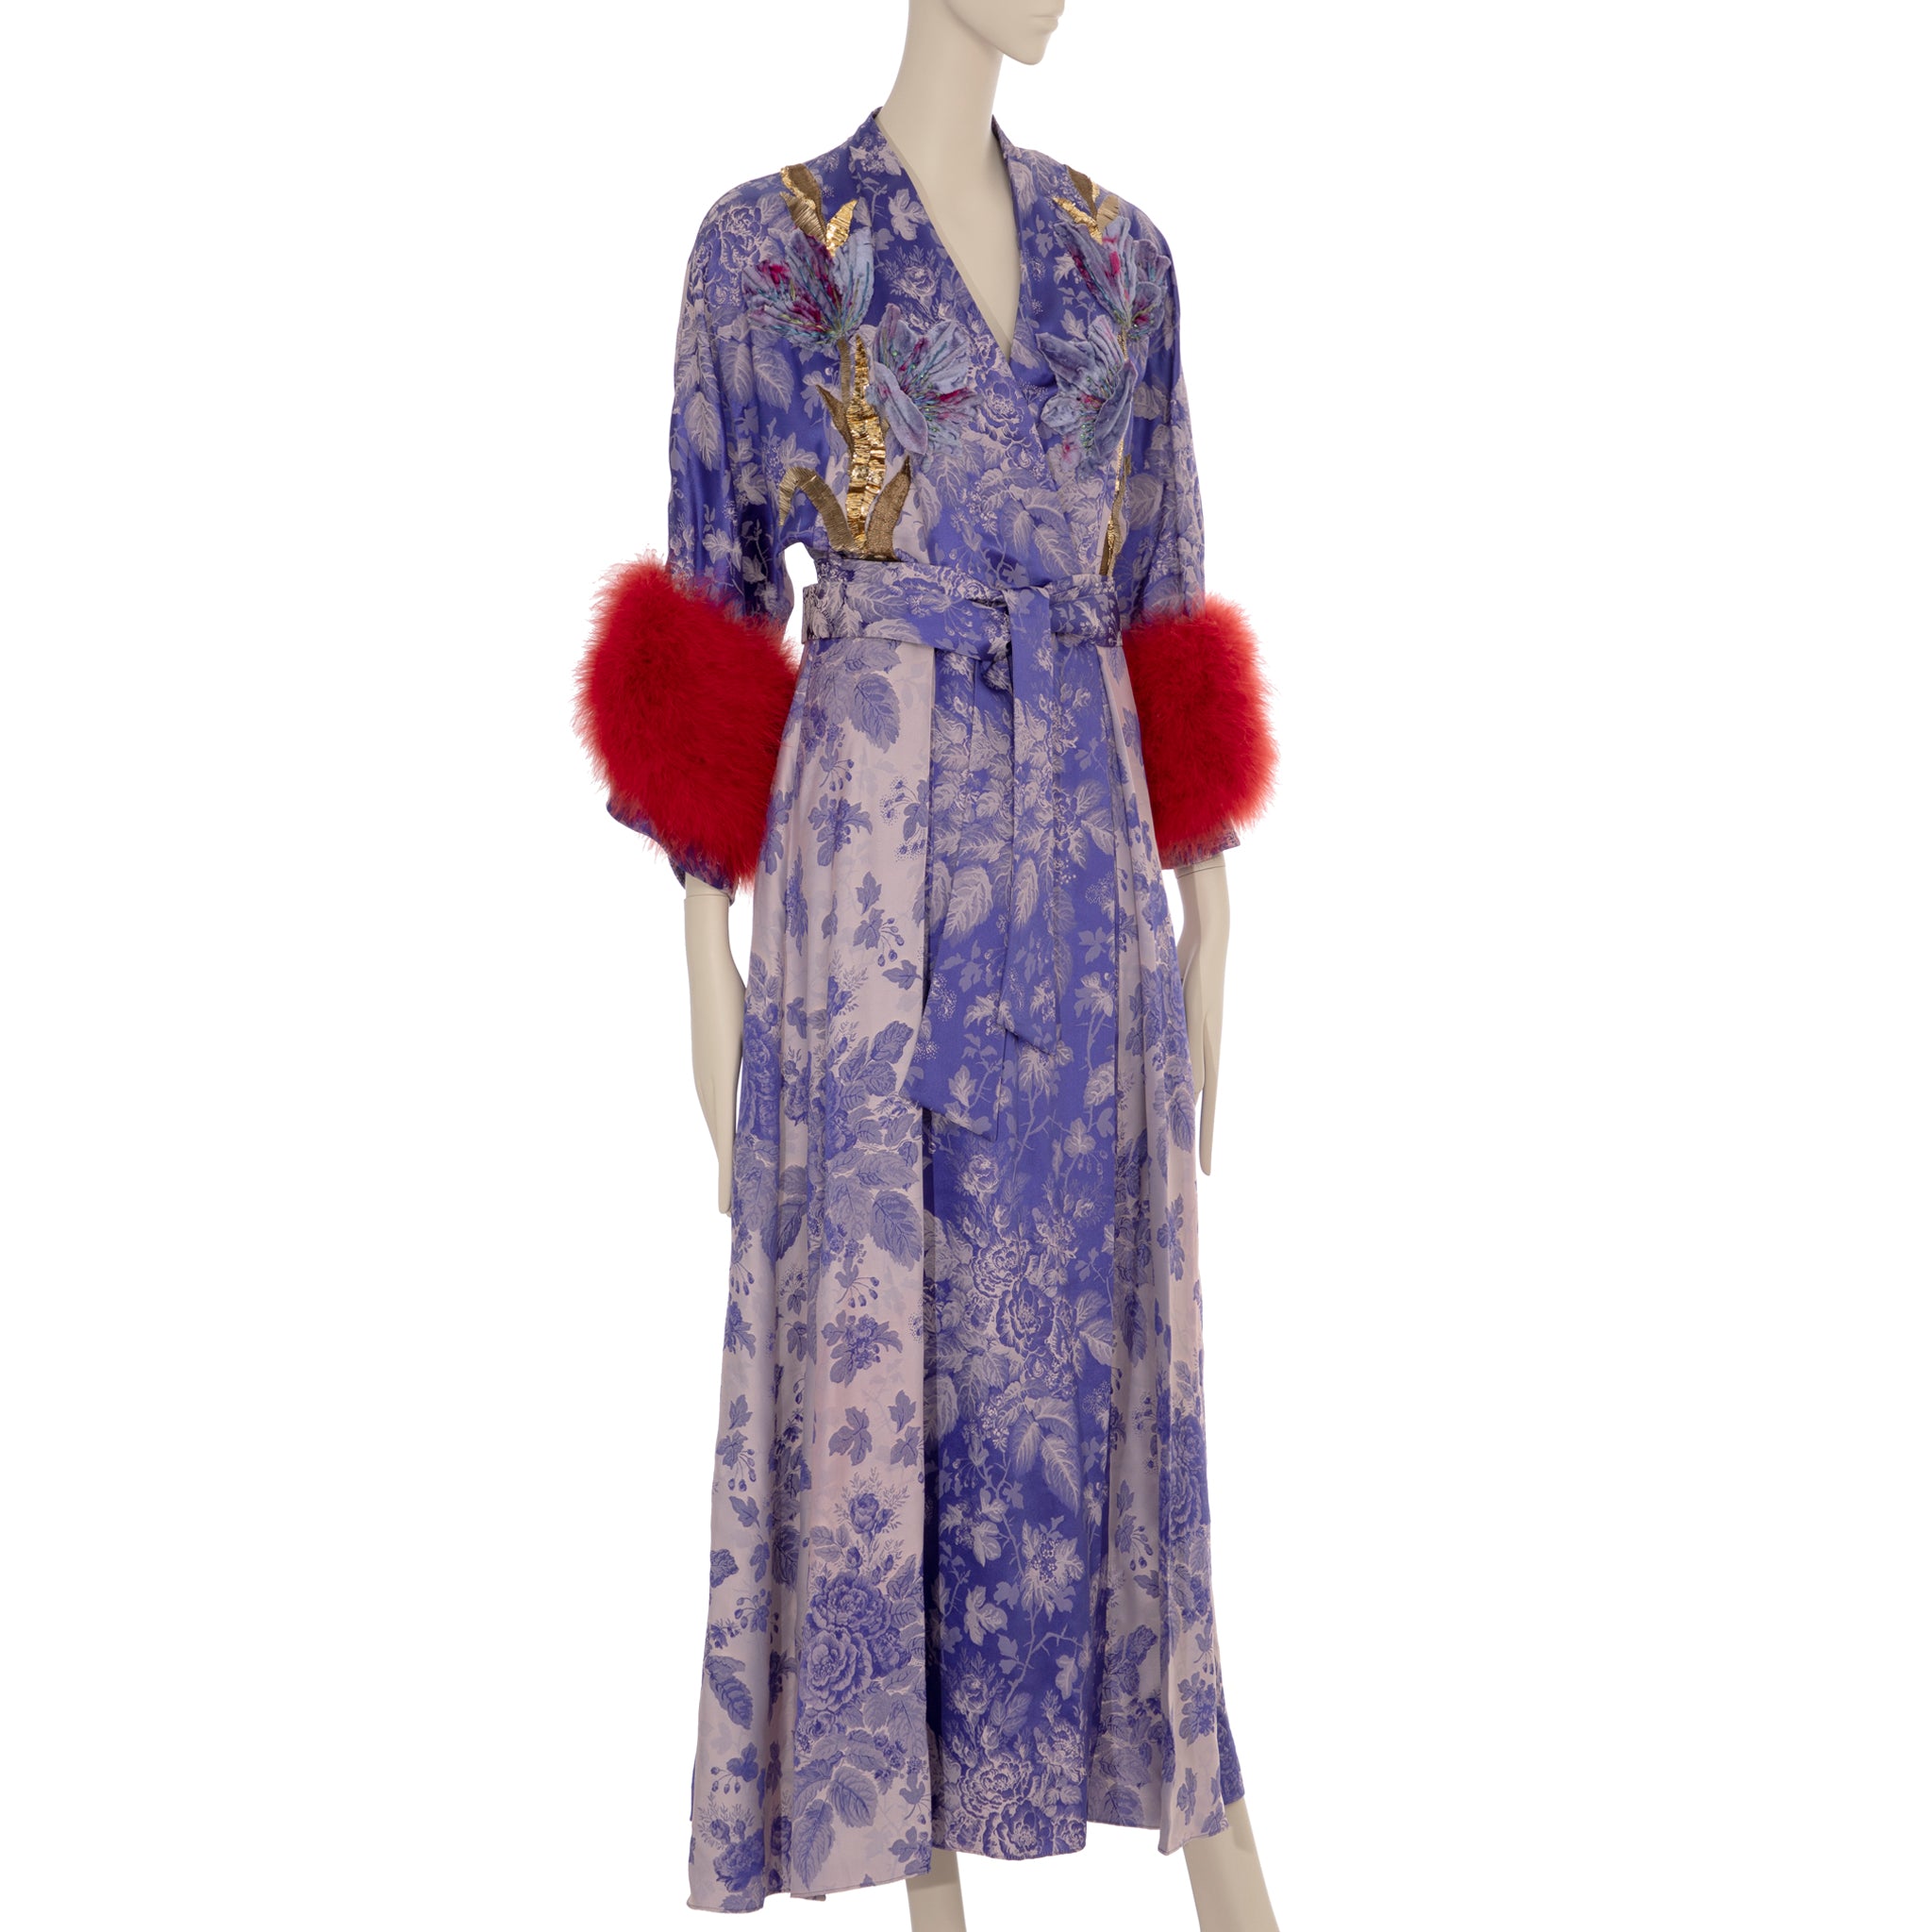 Gucci Floral Jacquard Wrap Dress With Ostrich Feathers 38 IT